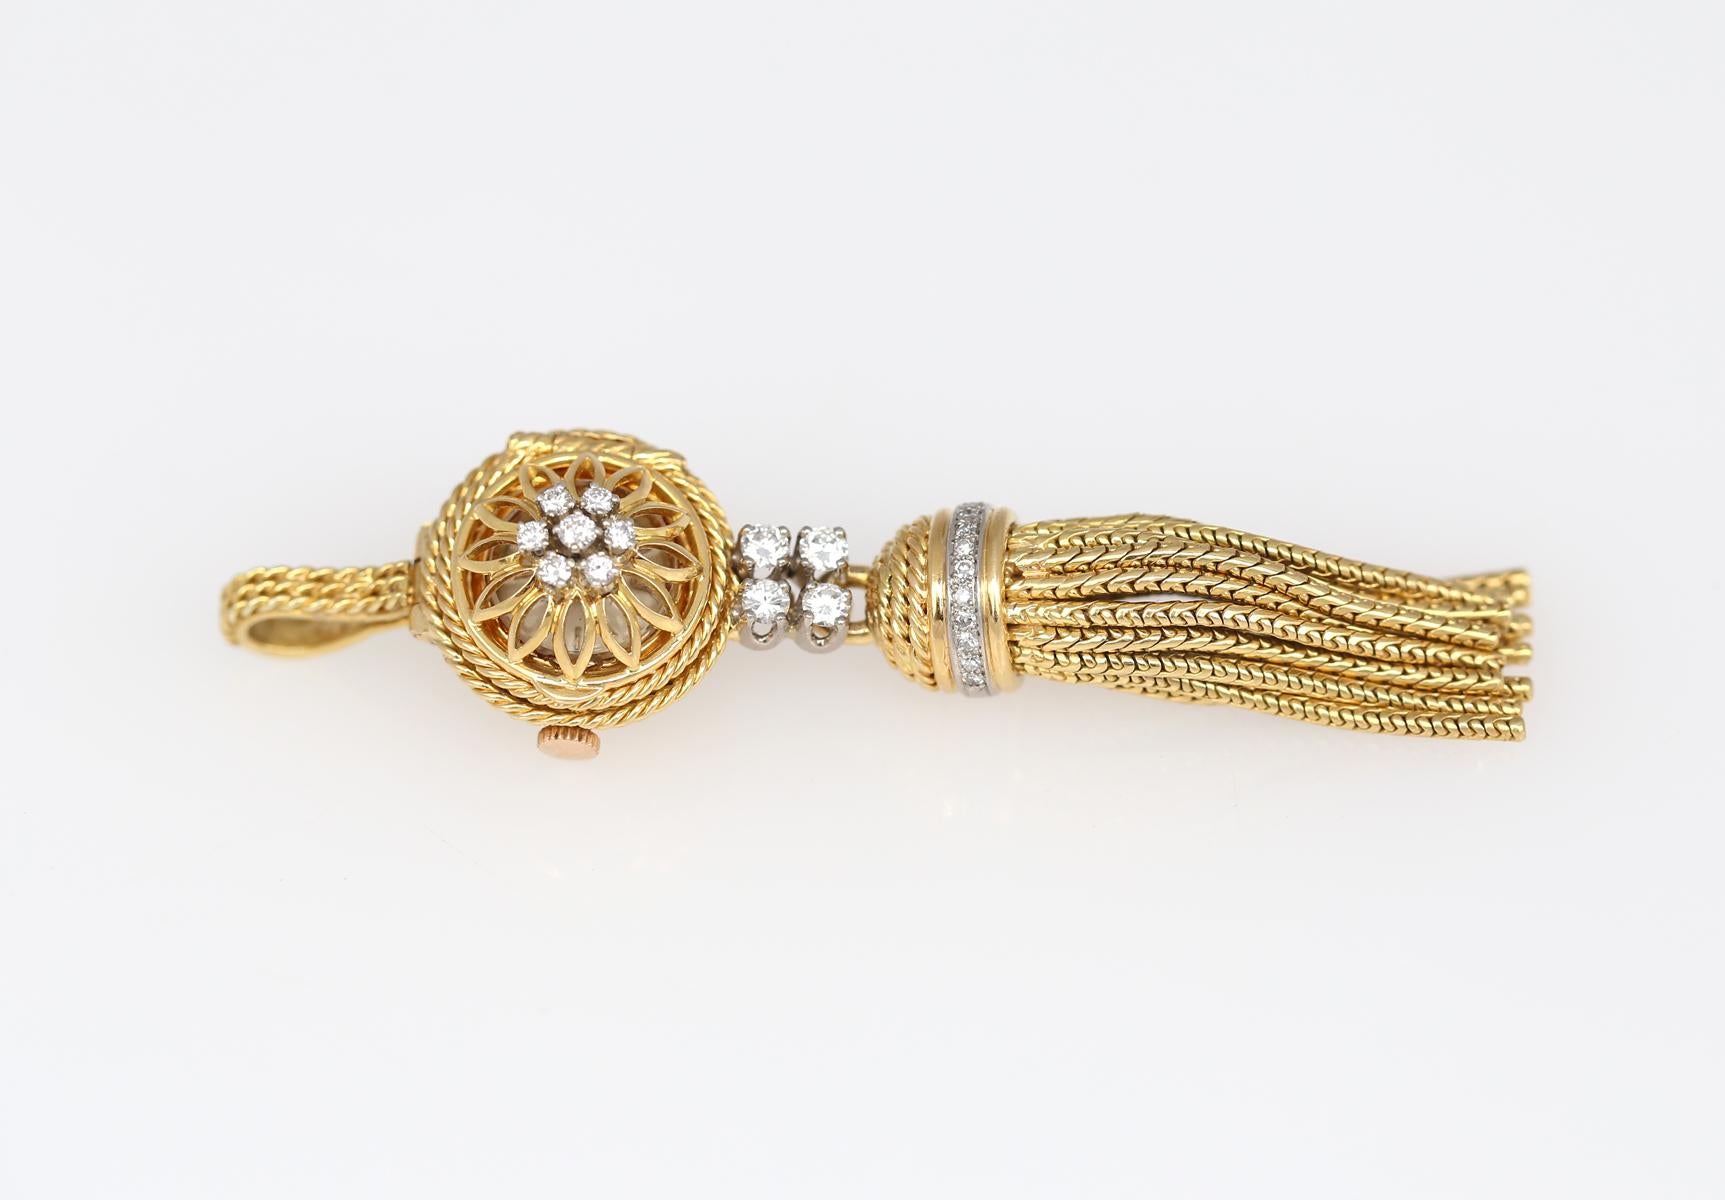 Rolex Ladies Pendant watch 18K Gold and Fine Diamonds. Extremely rare jewelry item, Rolex has only produced a limited number of these pendants for special clients. 
The delicate cover with small Diamonds opens to reveal a watch. Dial signed Rolex